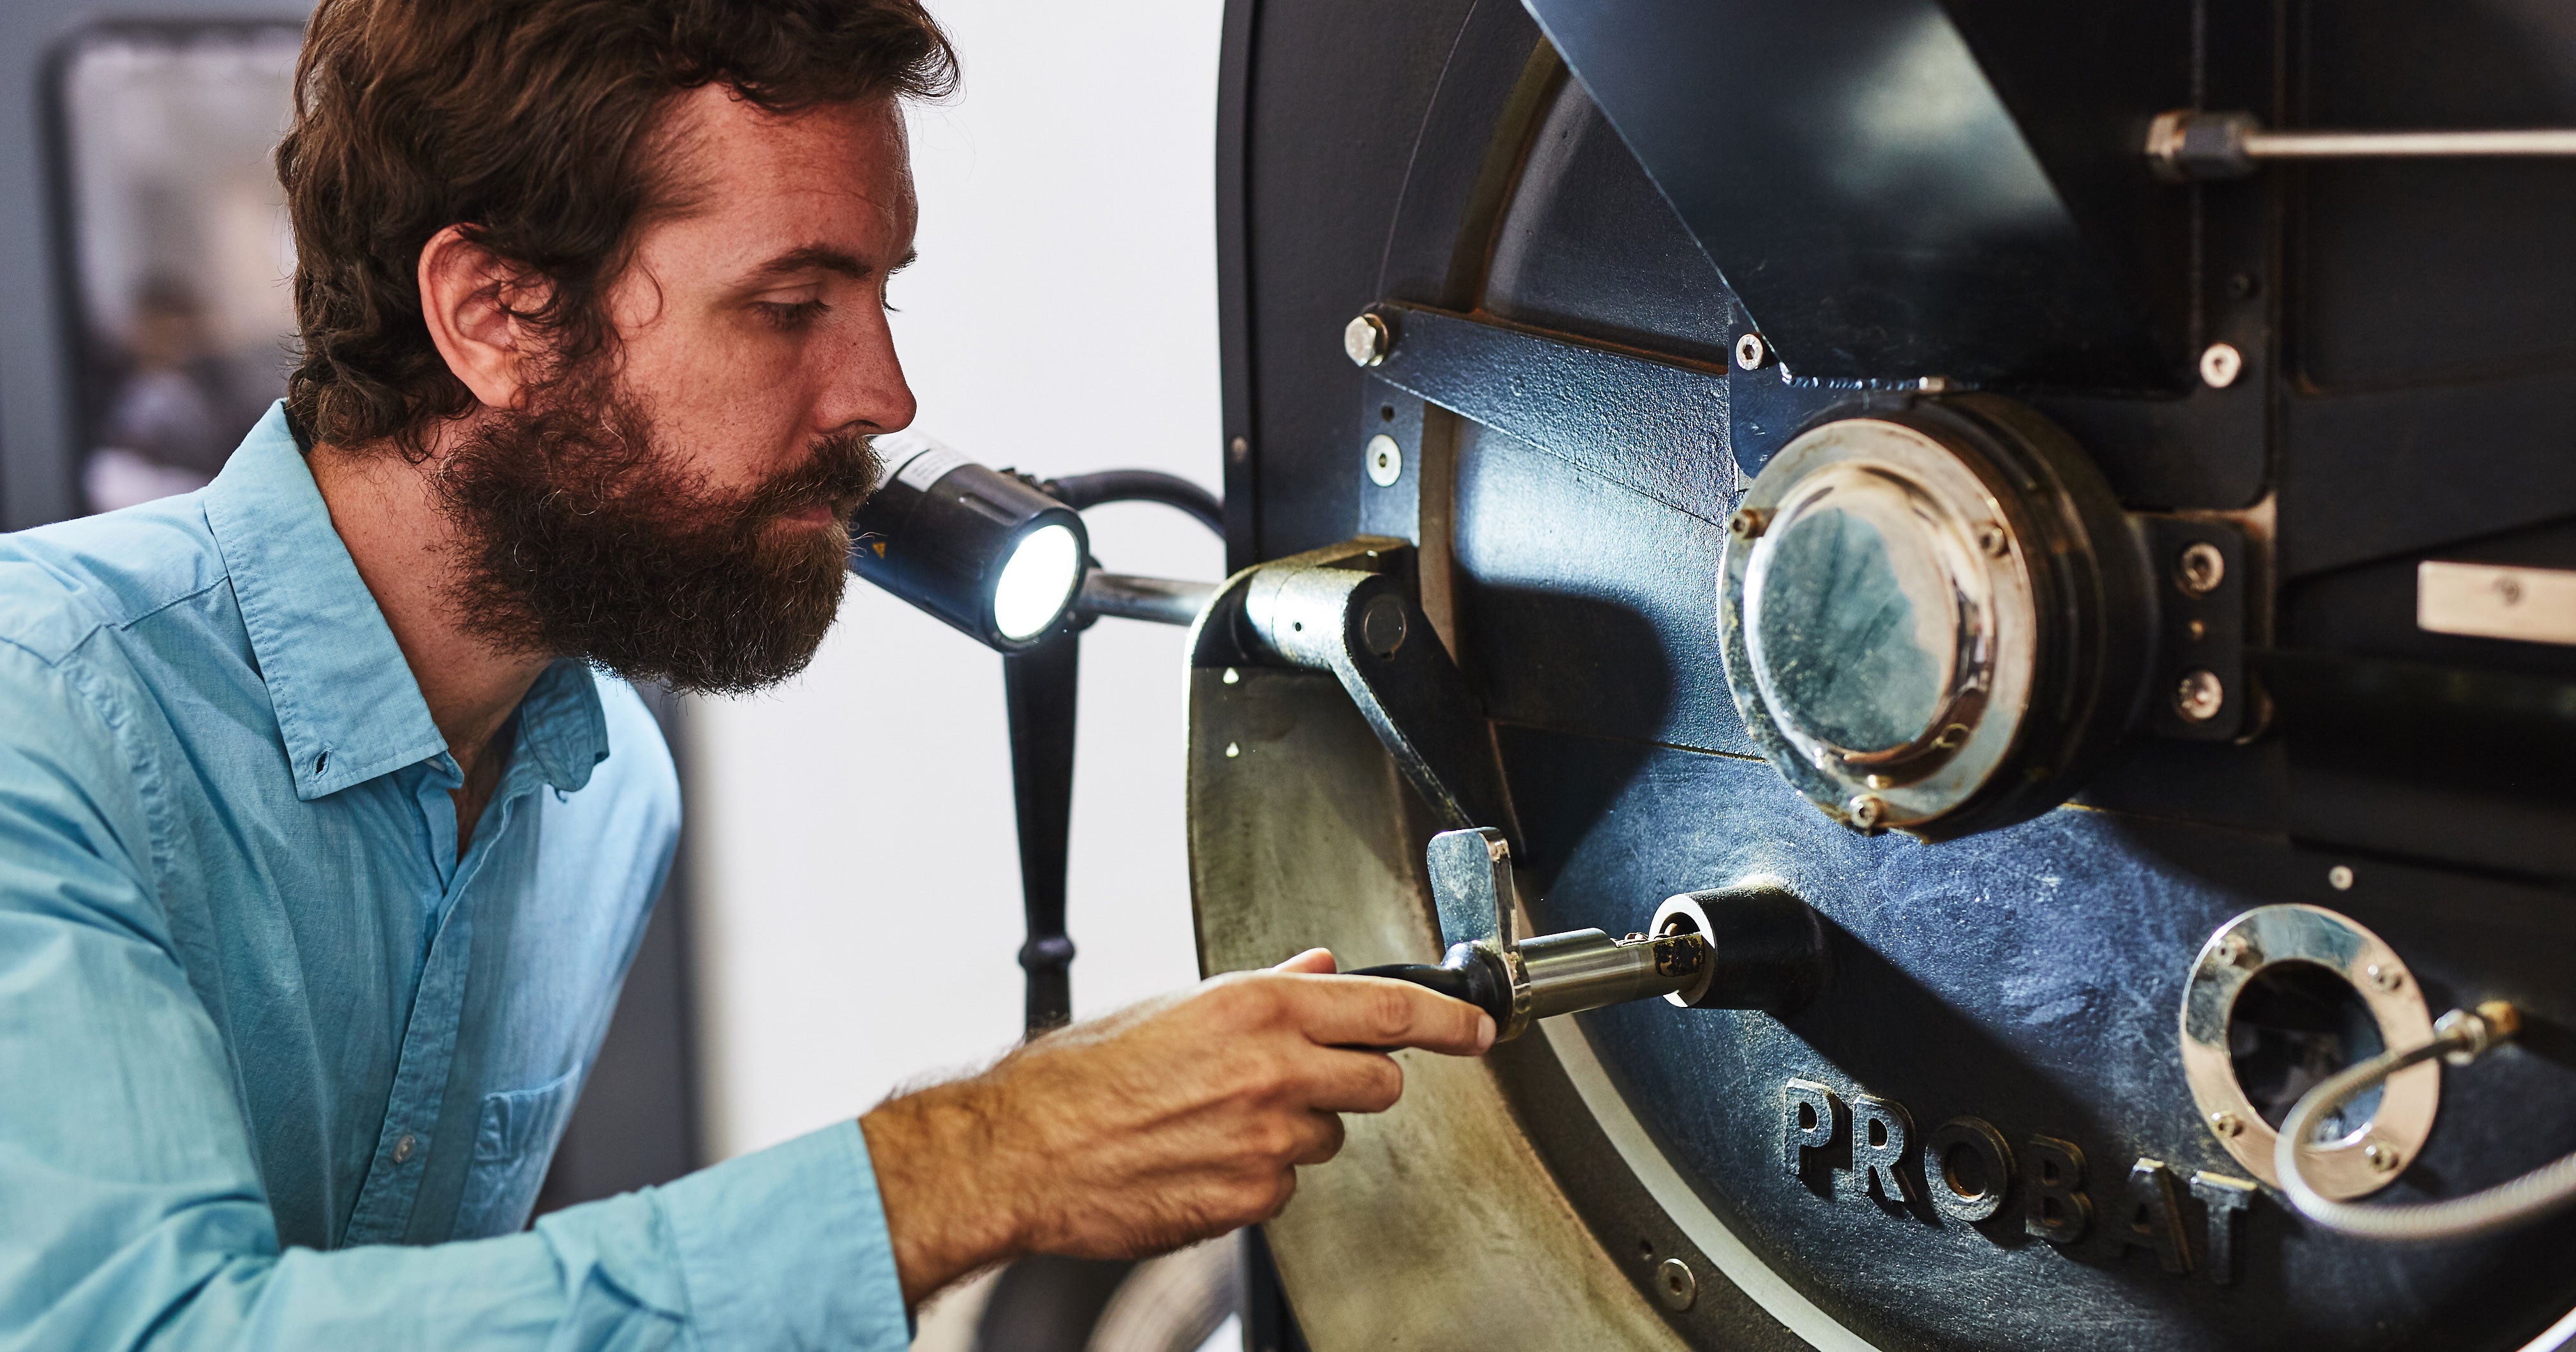 a bearded man in front of a probat roaster inspecting coffee in the trier